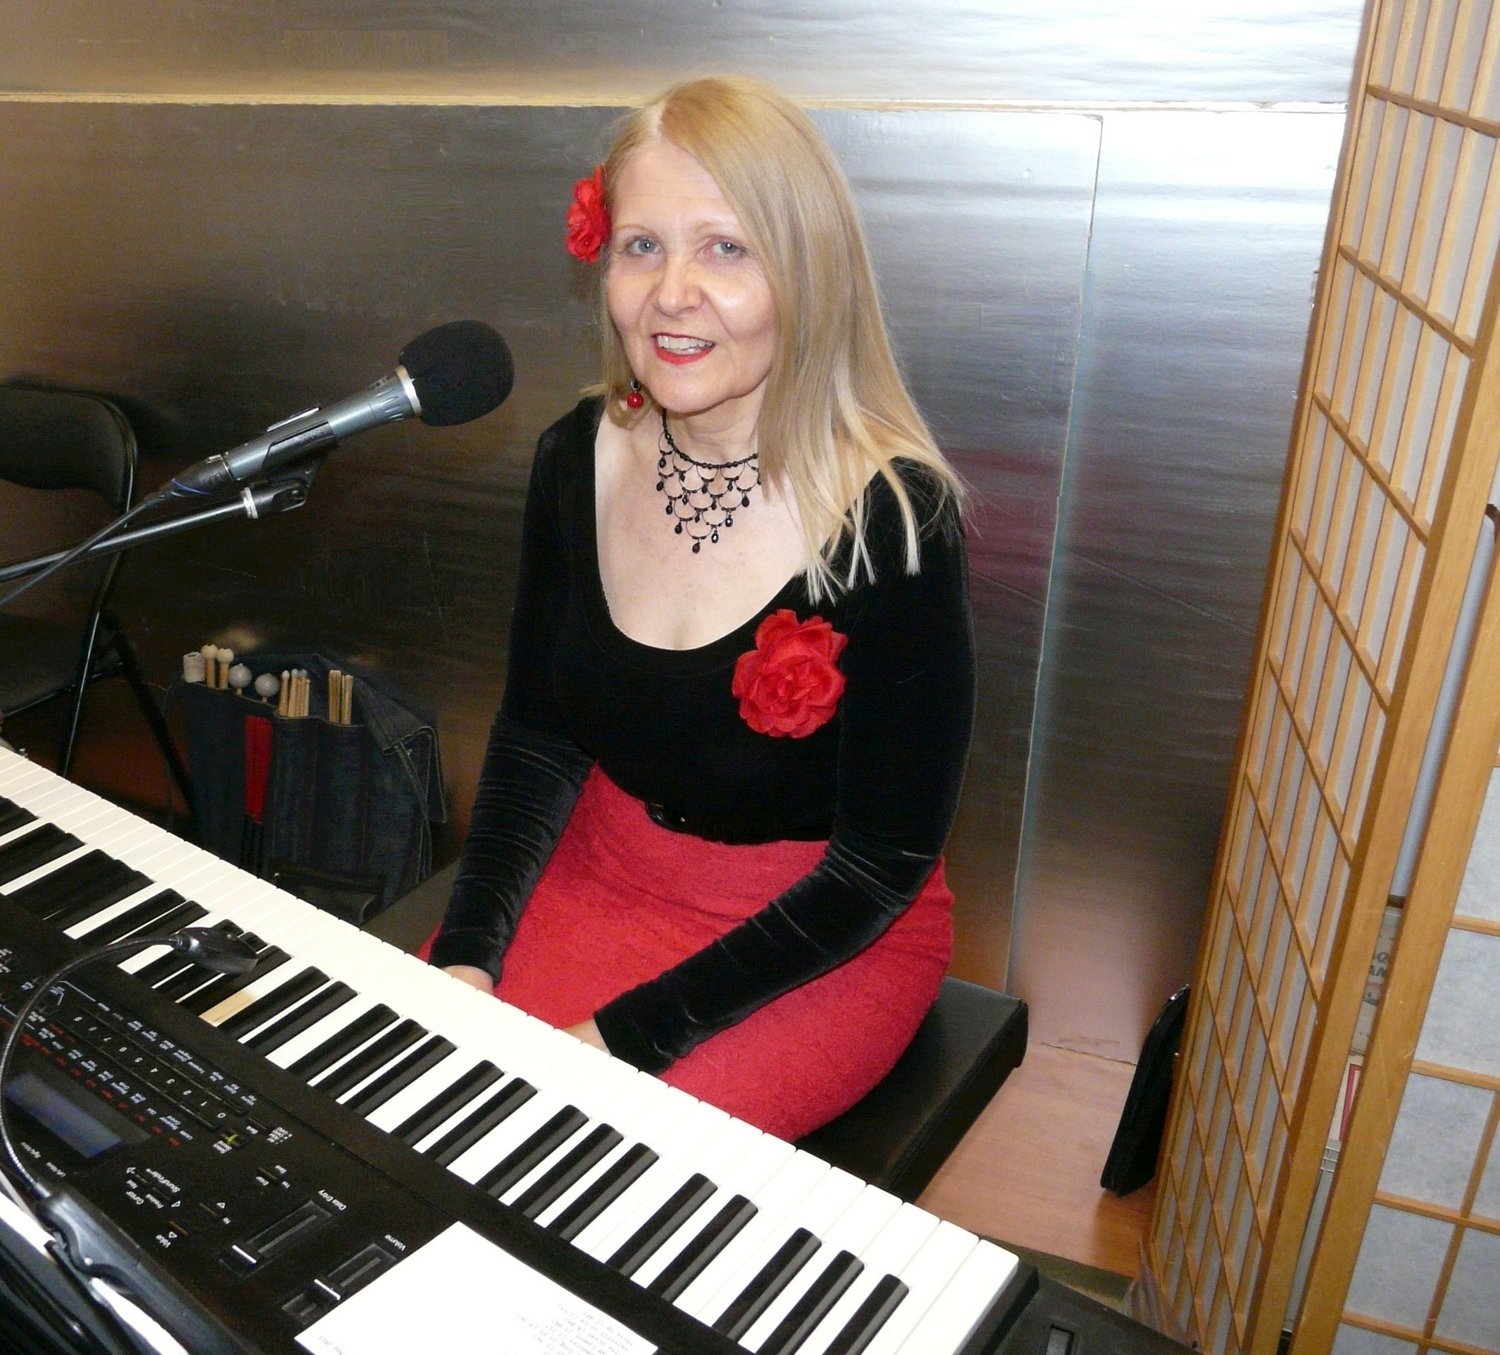 Kari Tieger, shown here on keyboard during a Valentine’s performance, began playing piano at age 14. She was given a new piano for her 15th birthday, and she still plays it today.